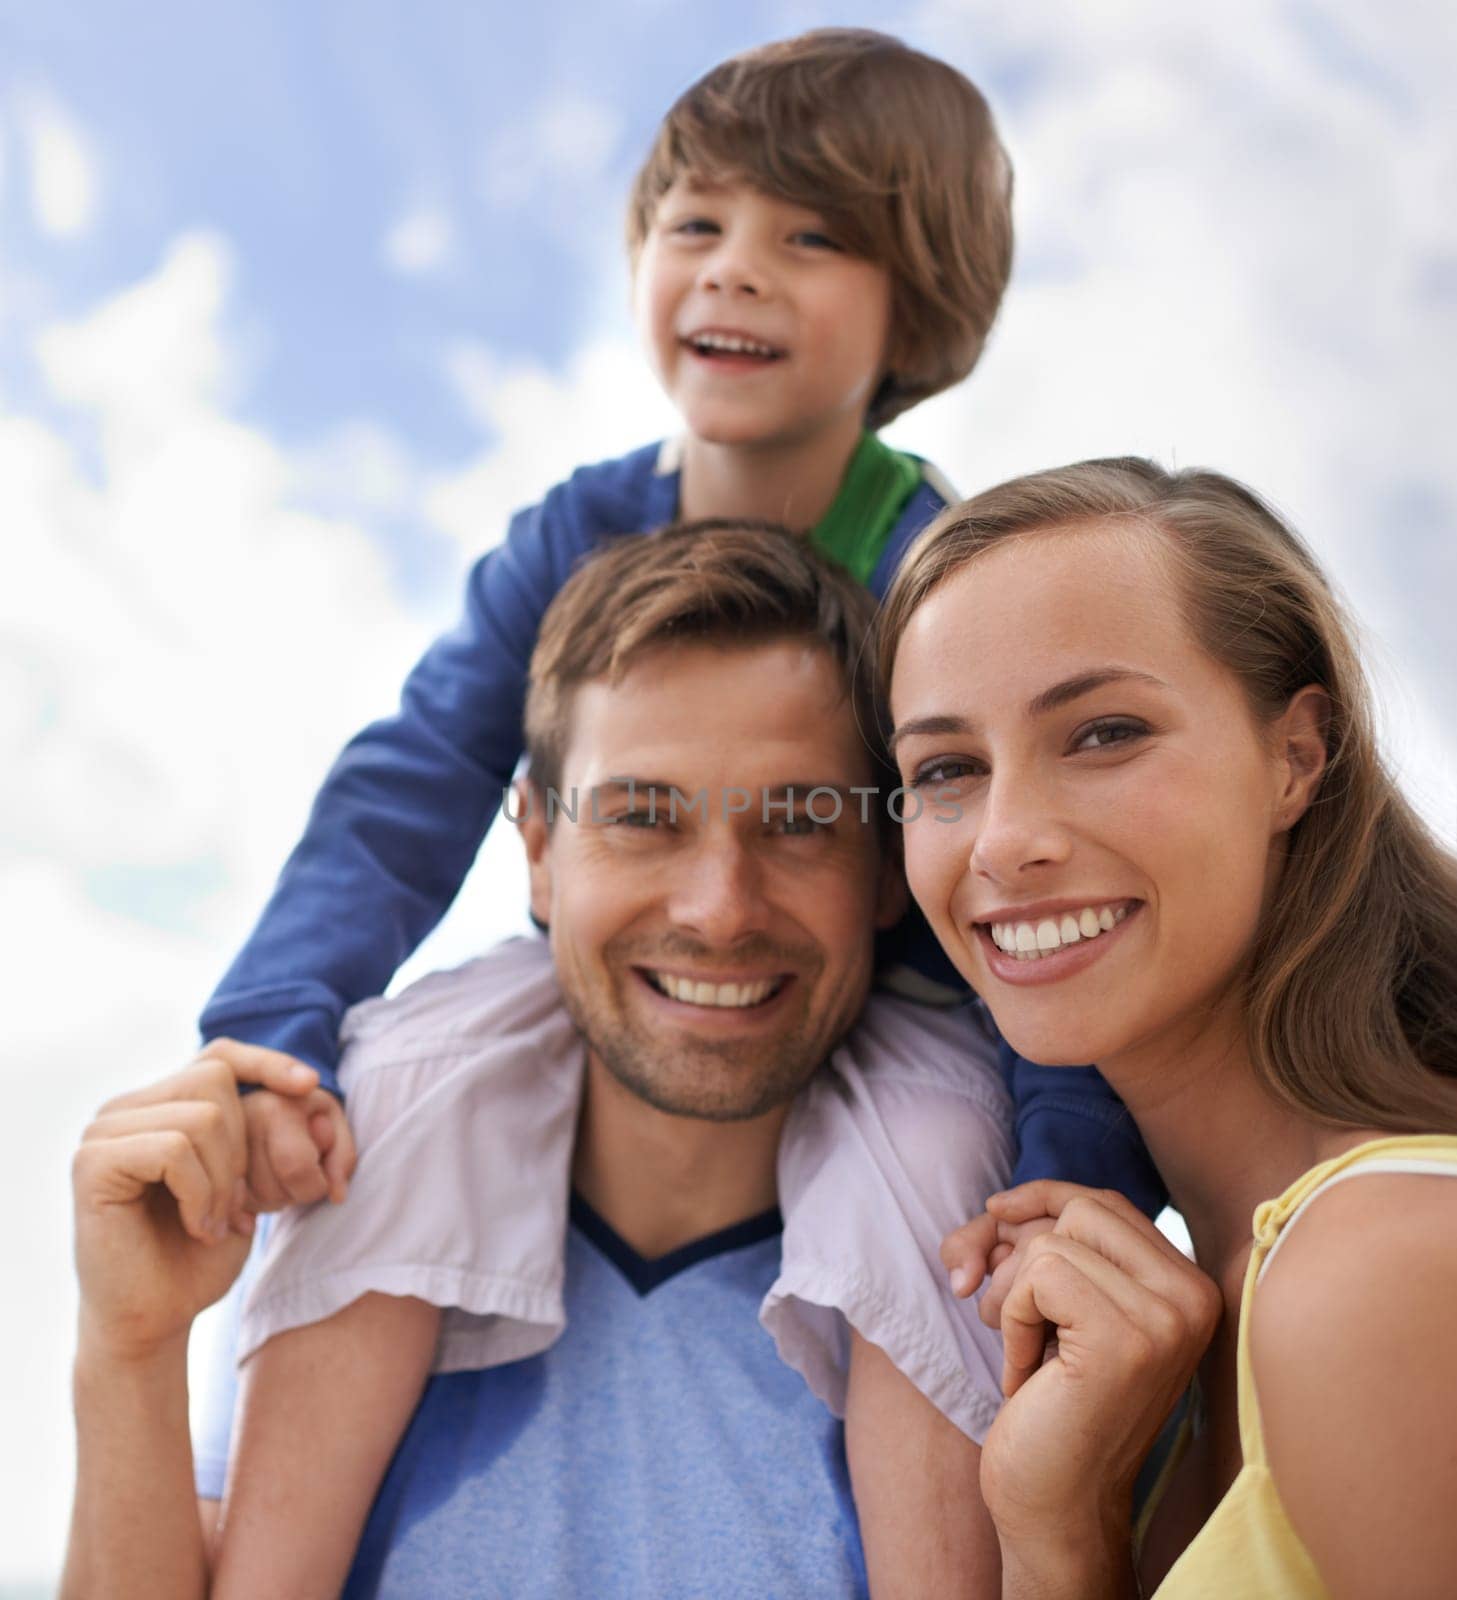 Family, sky and smile portrait outdoor while happy for travel, fun or holiday in summer. Face of man, woman and child or son together on vacation or adventure in nature with happiness, love and care.